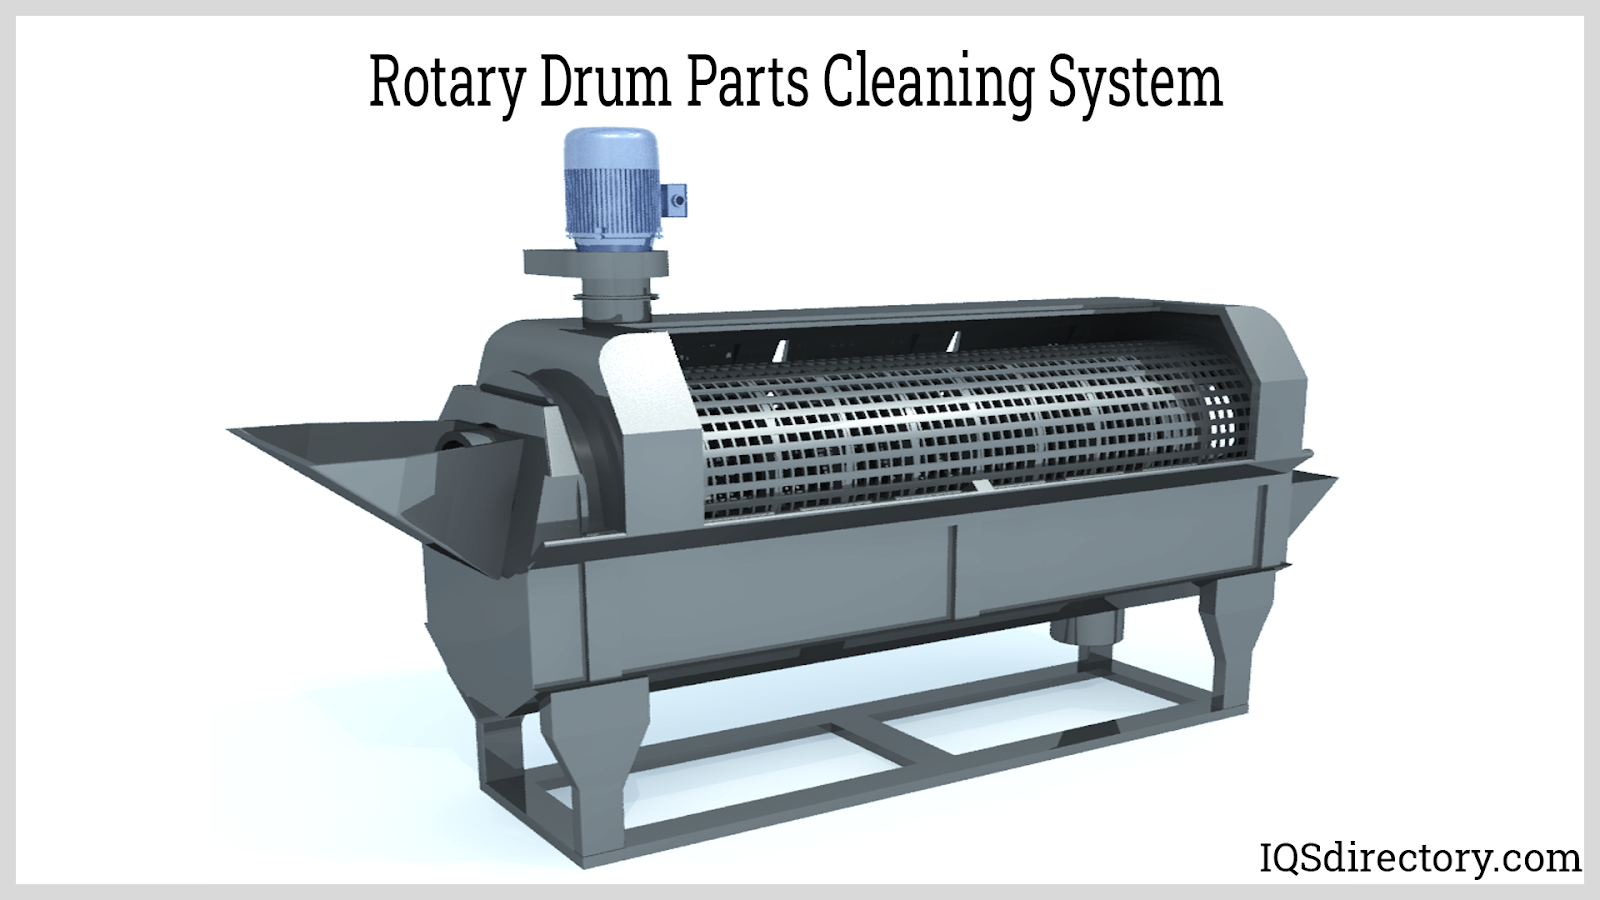 Rotary Drum Parts Cleaning System